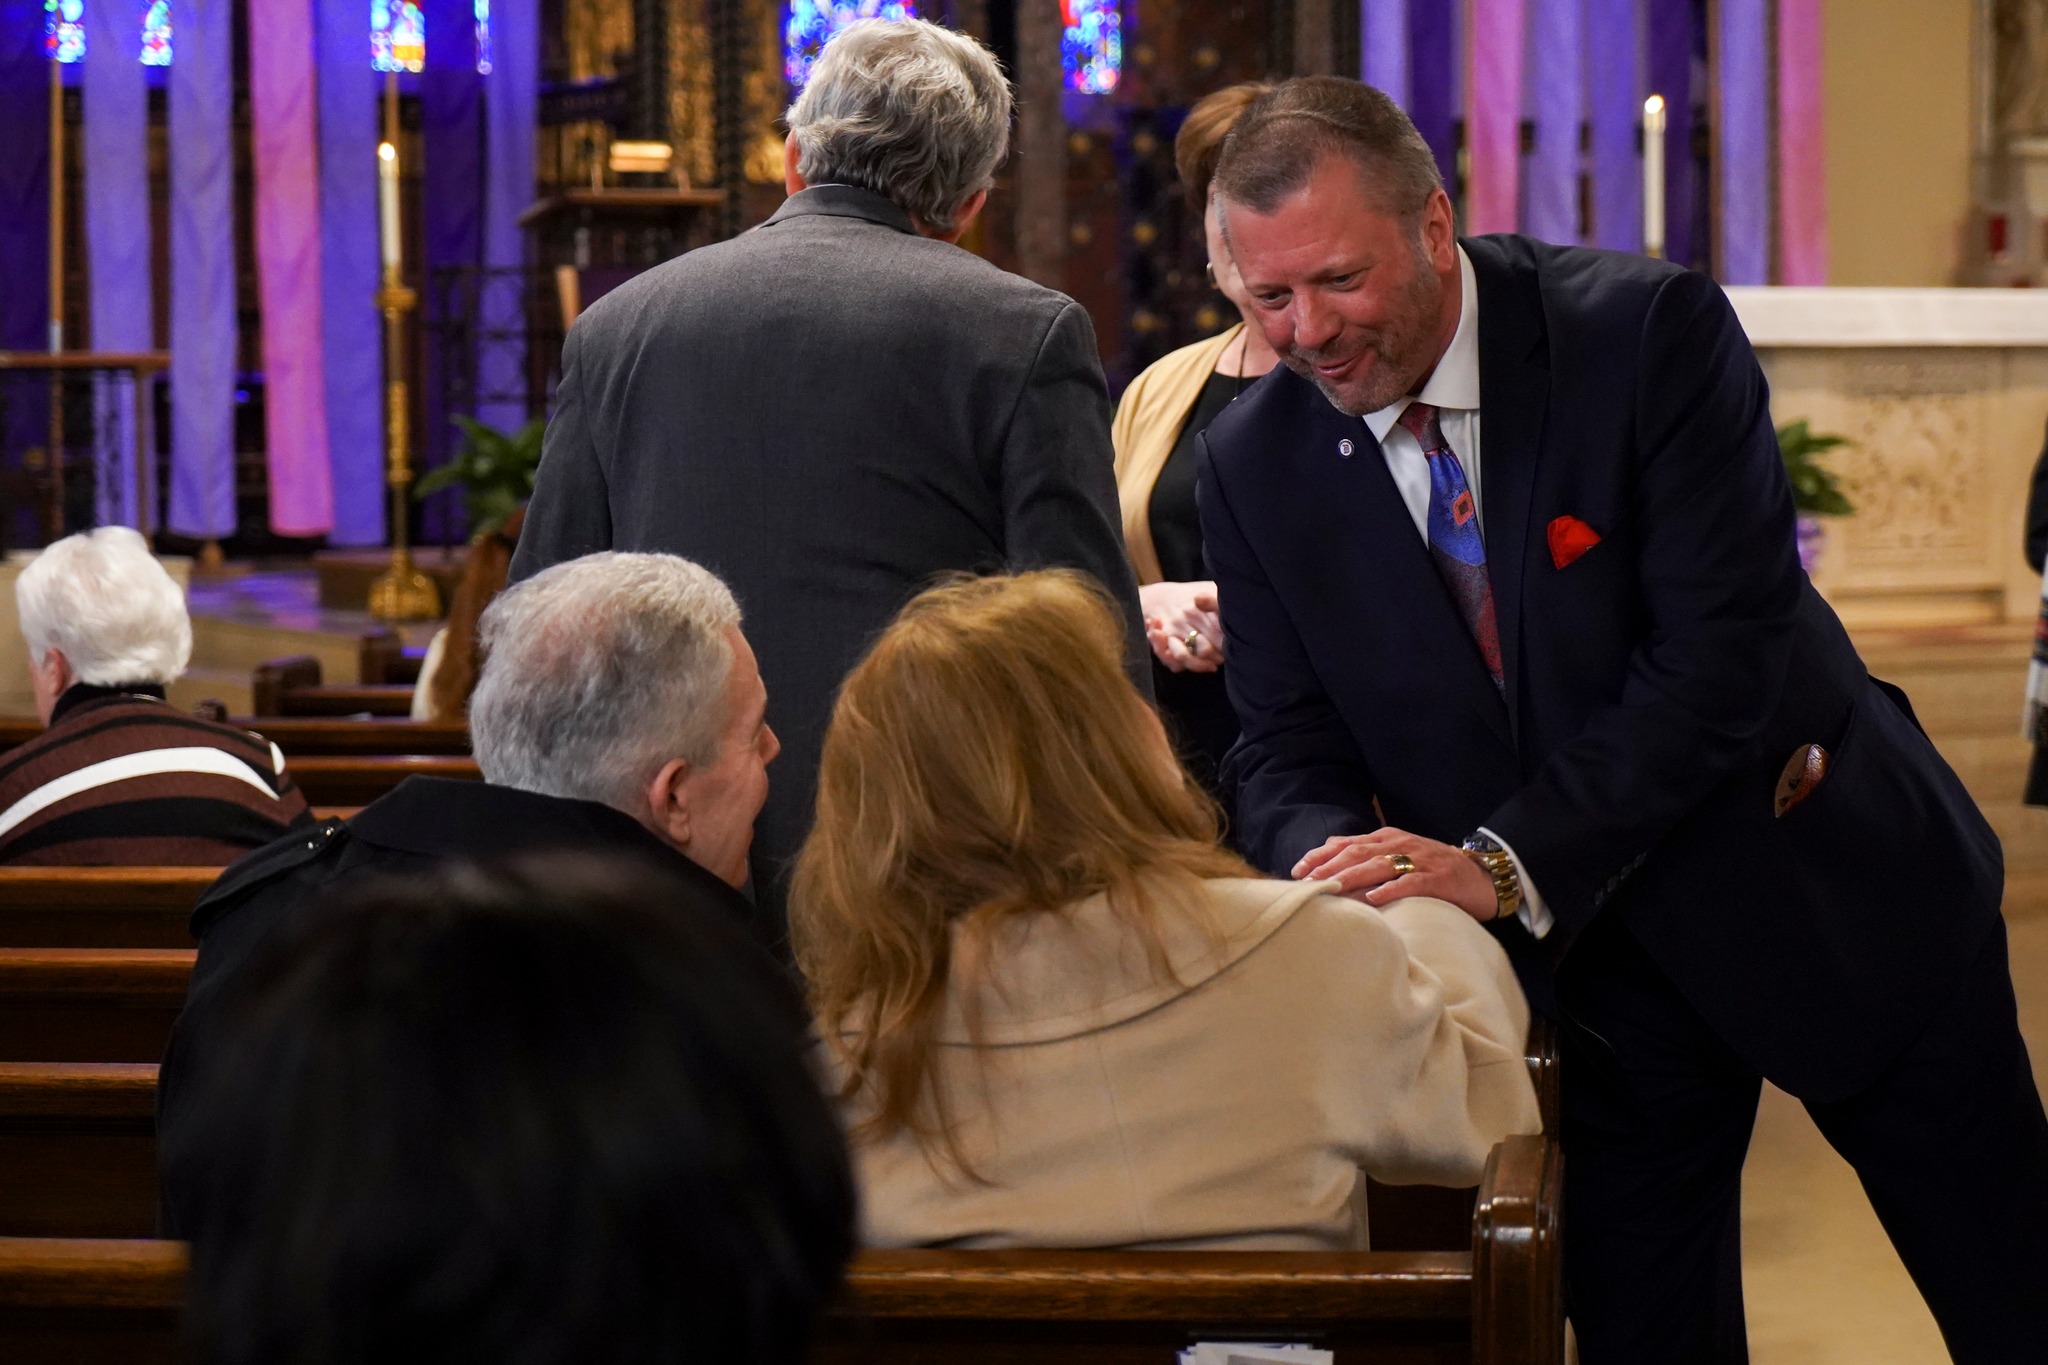 President Donald Taylor stands inside of a church, shaking hands with a pair of people sitting in a pew. Others are pictured in the background.